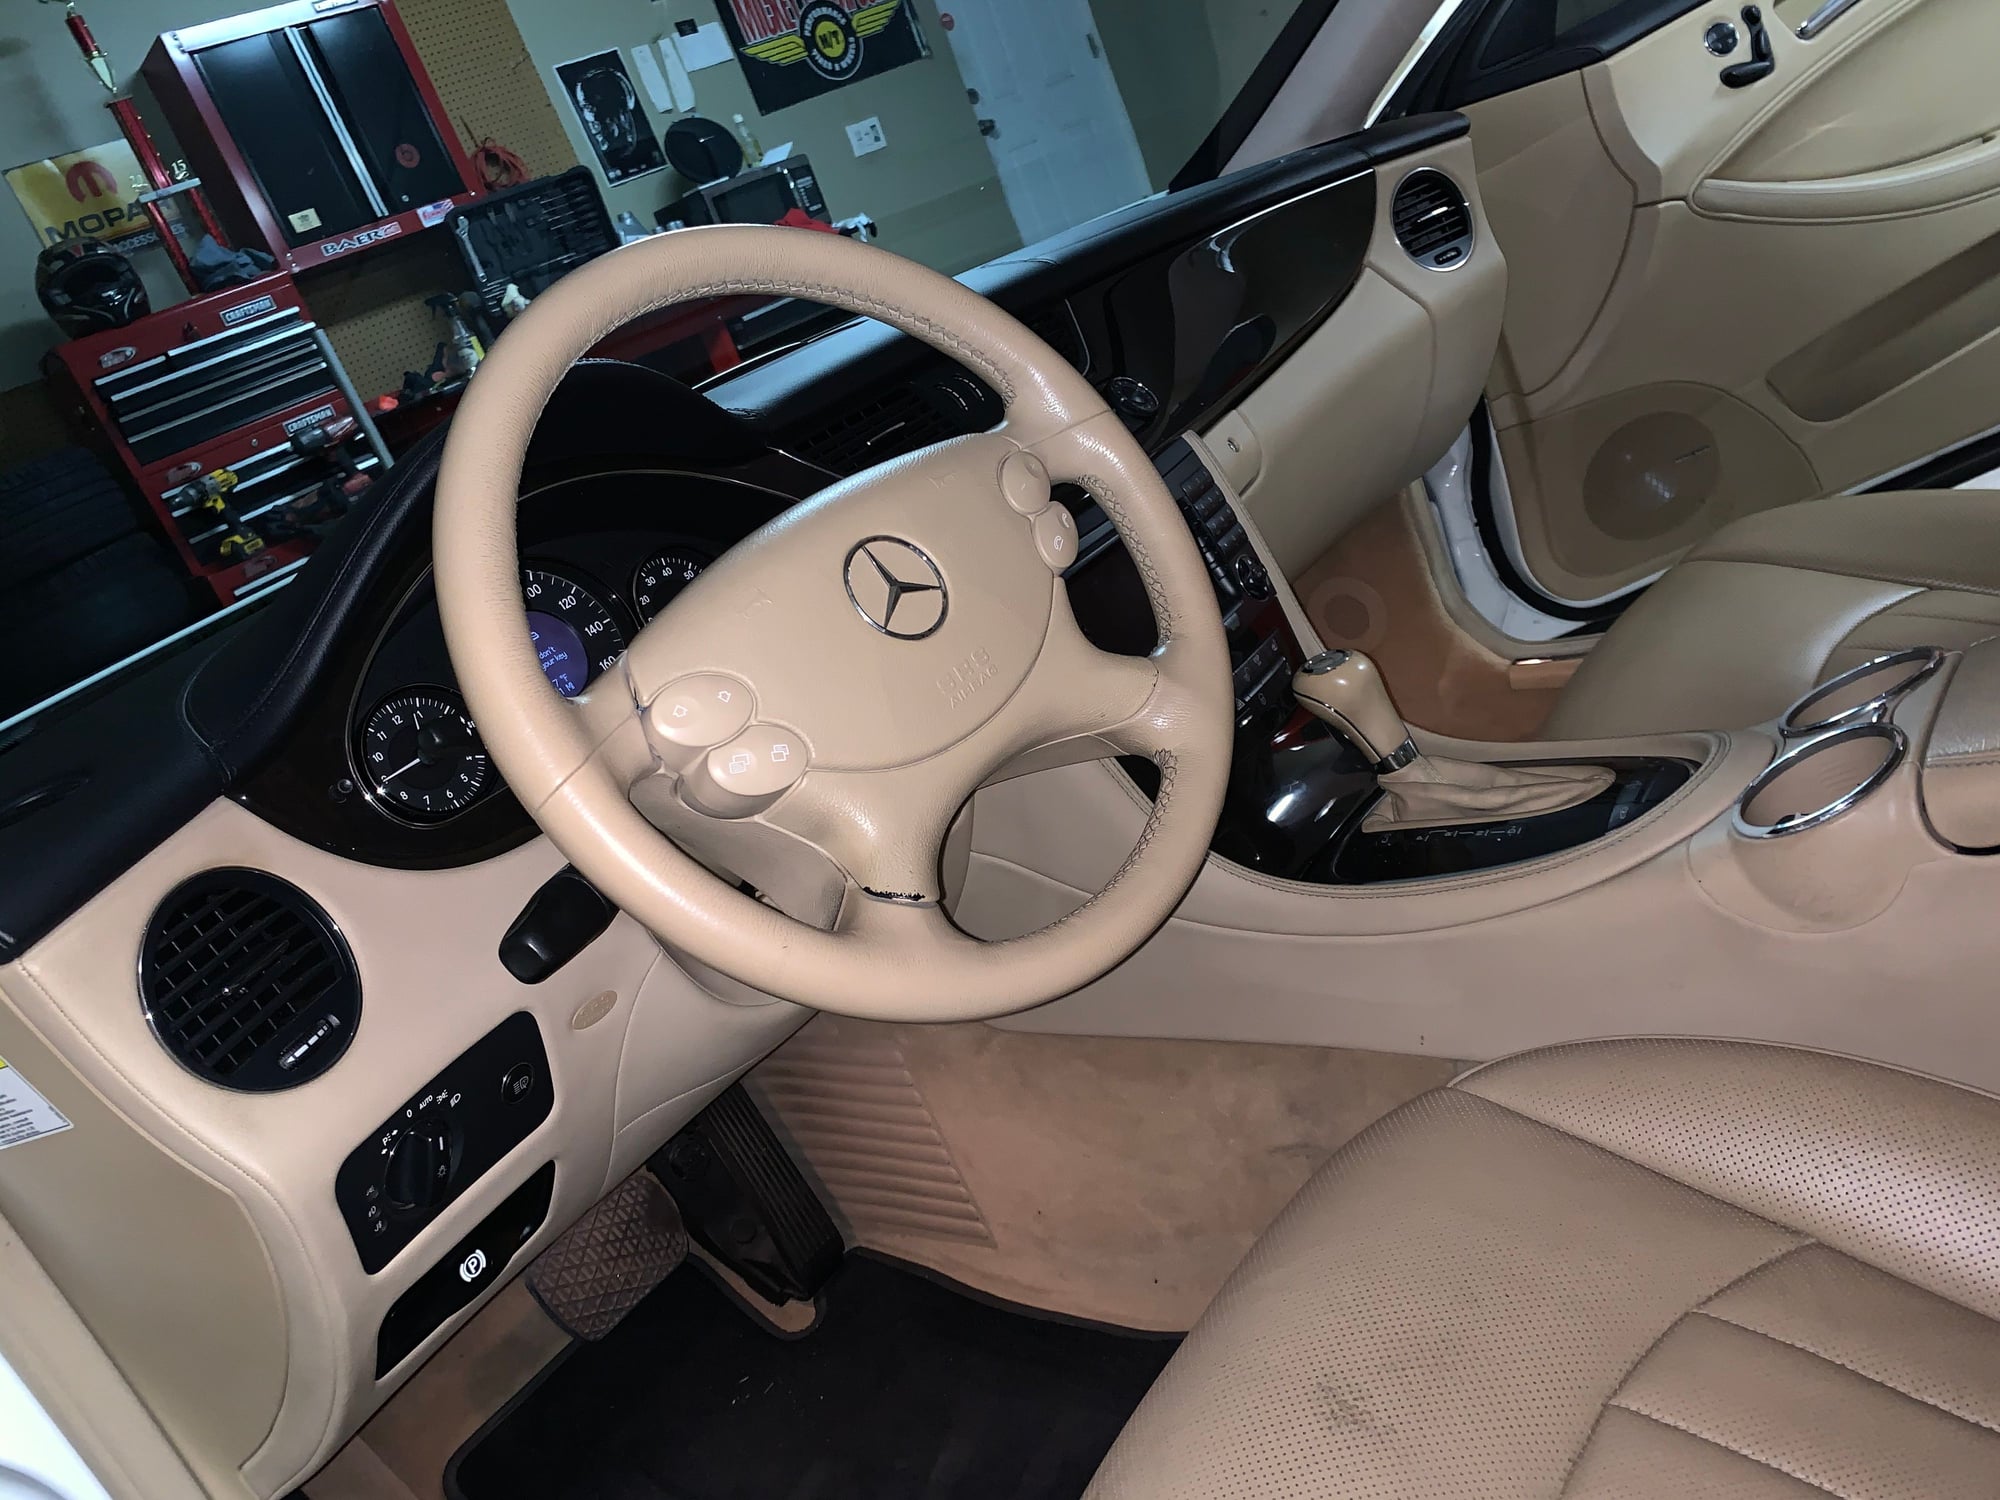 2007 Mercedes-Benz CLS550 - 07 CLS 550 AMG sport package - Used - VIN WDDJ72X37A097528 - 106,386 Miles - 8 cyl - 2WD - Automatic - Sedan - White - St Louis, MO 63113, United States